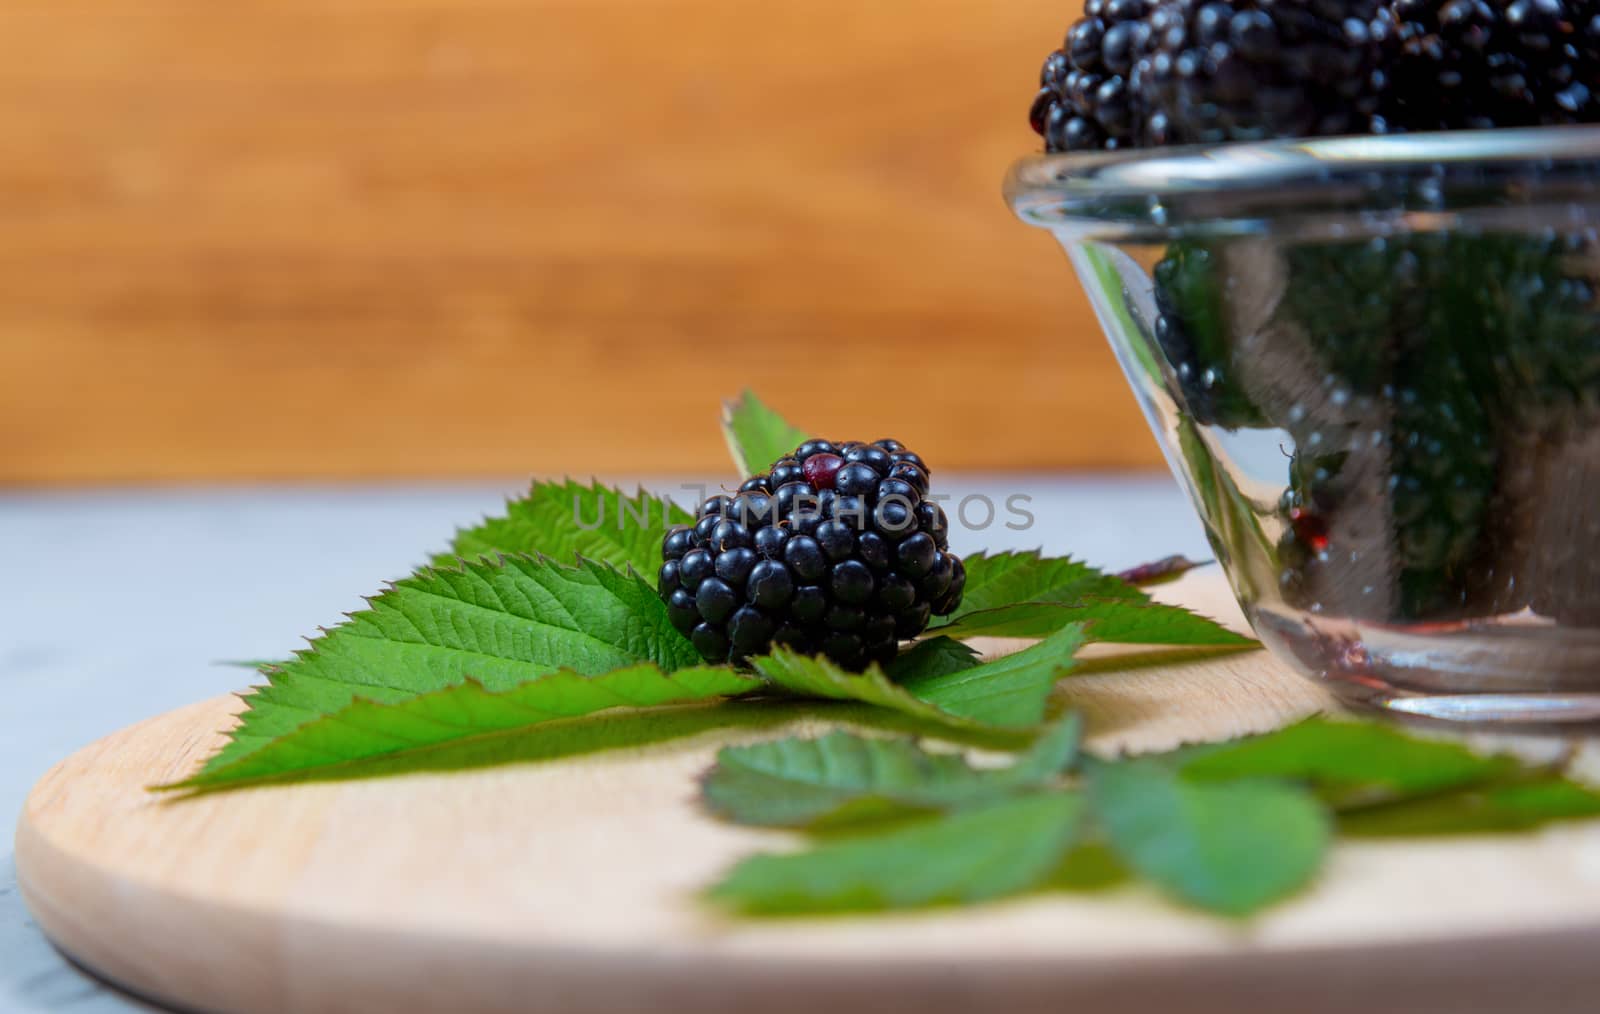 ripe blackberries with leaves in a glass bowl on a bamboo cutting board on a concrete background, rustic, selective focus